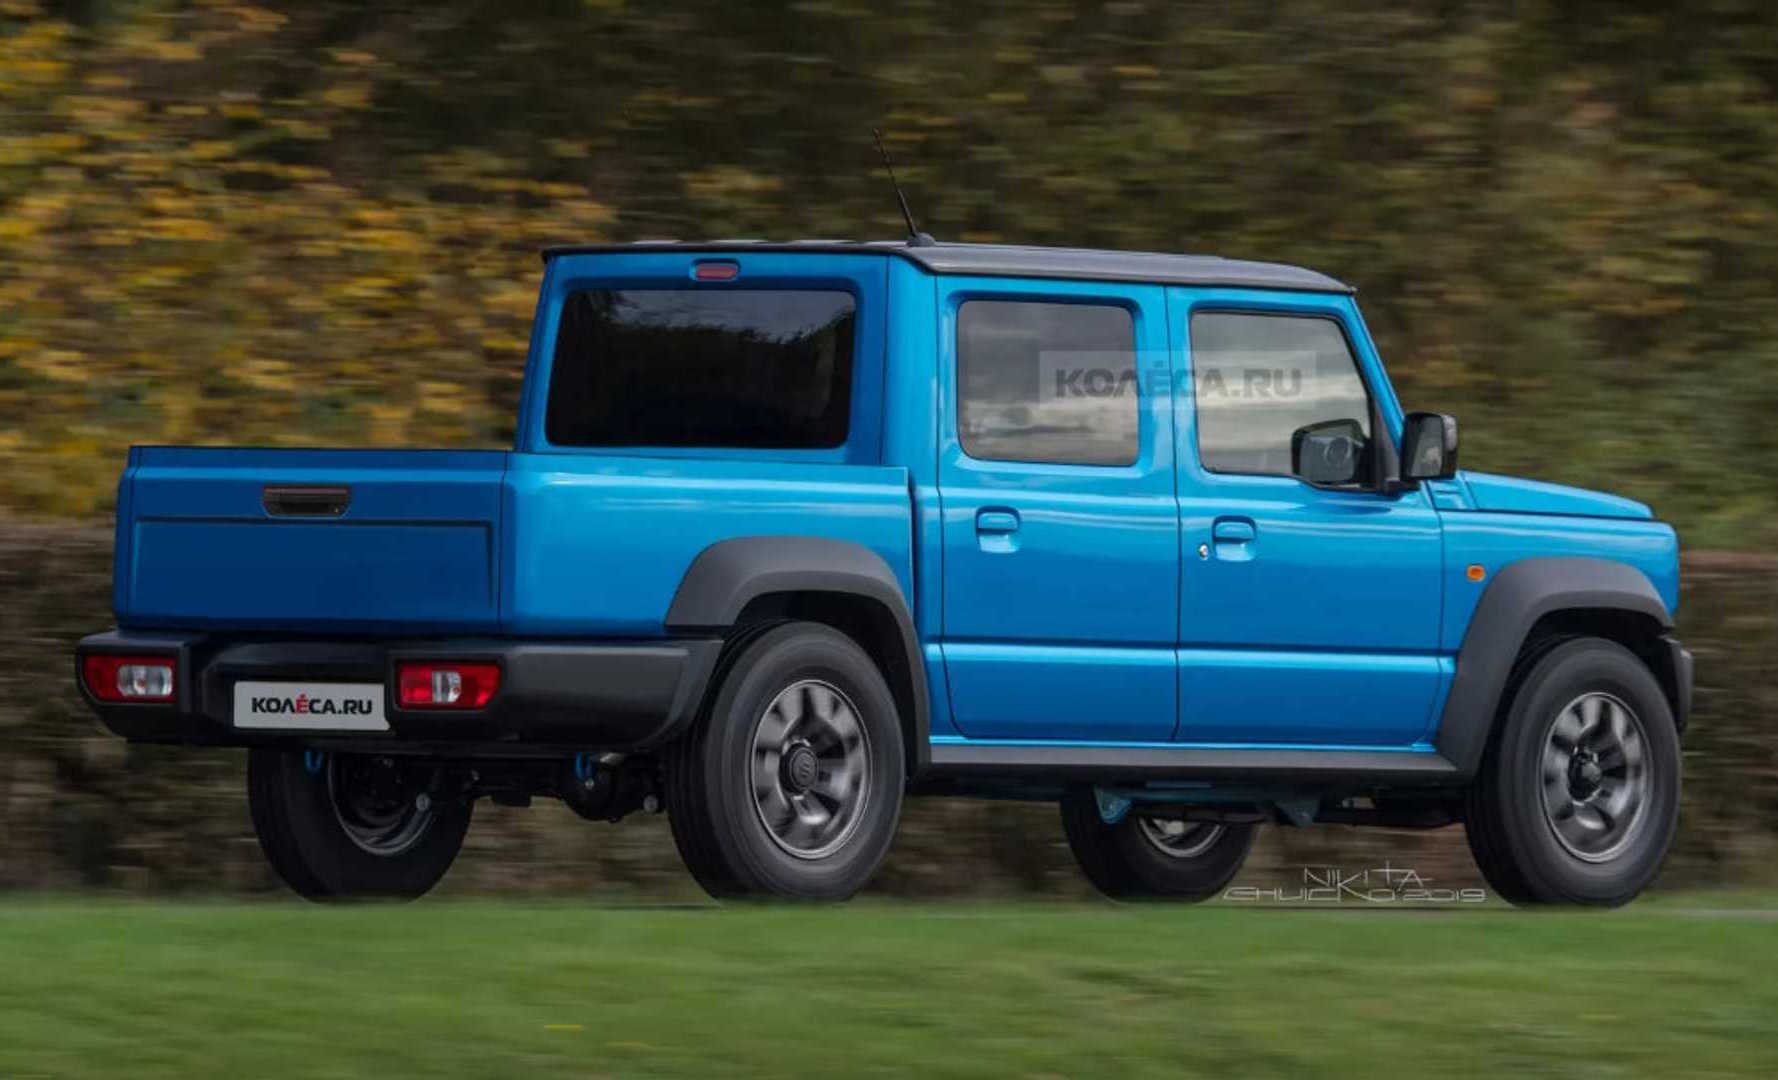  Suzuki  Jimny  dual cab ute envisioned as perfect plucky 